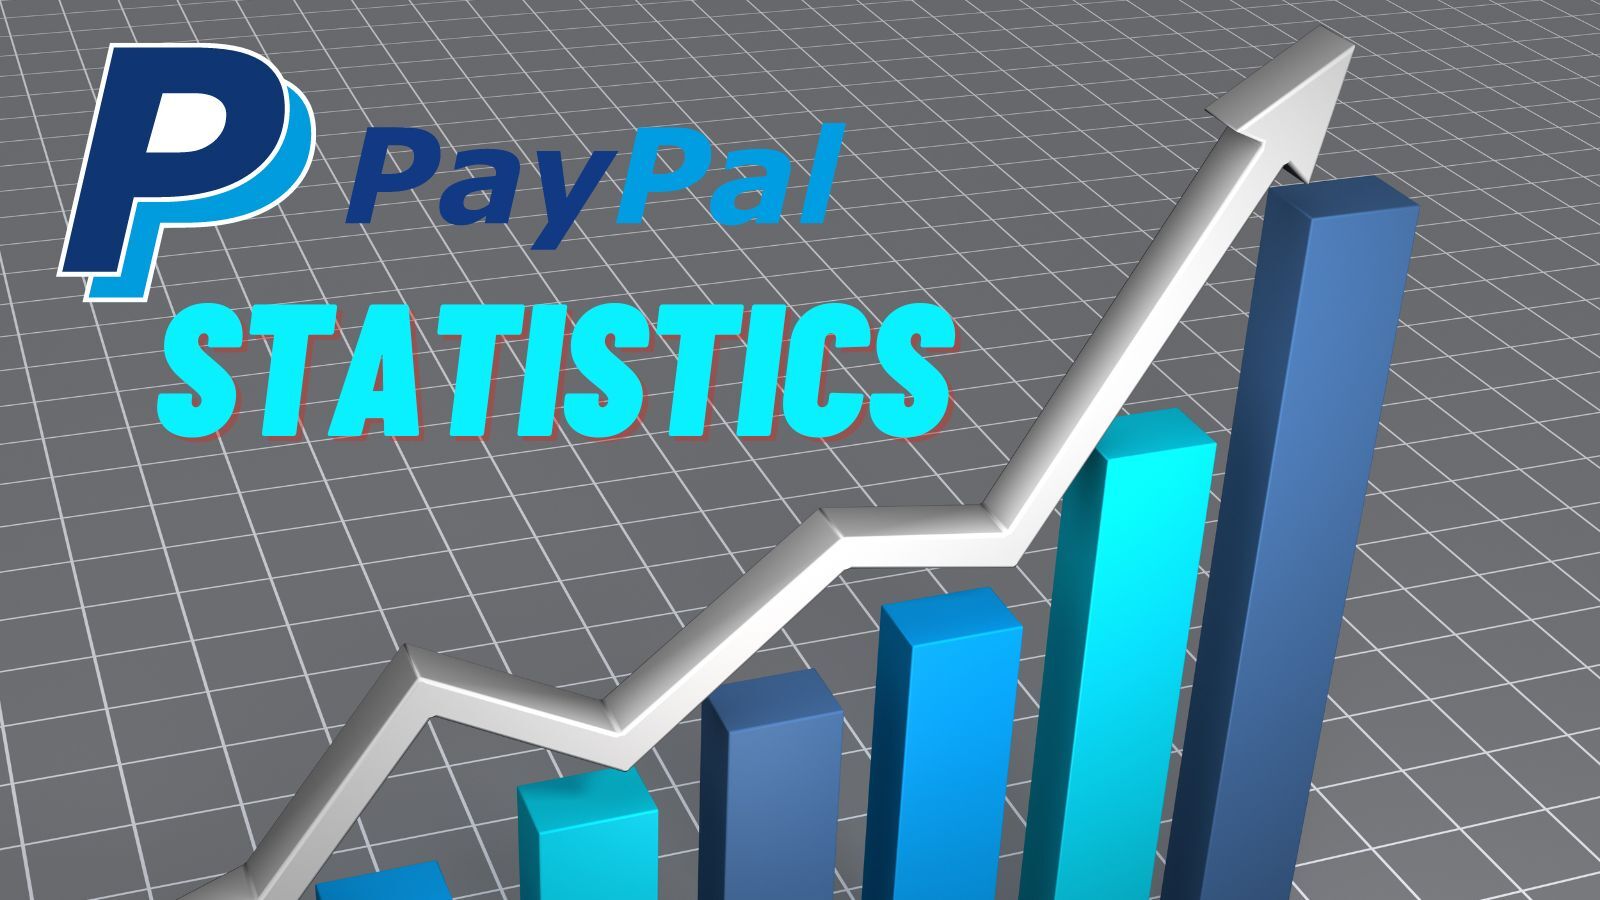 30 PayPal Statistics, Facts & Trends You Should Know! (2023)